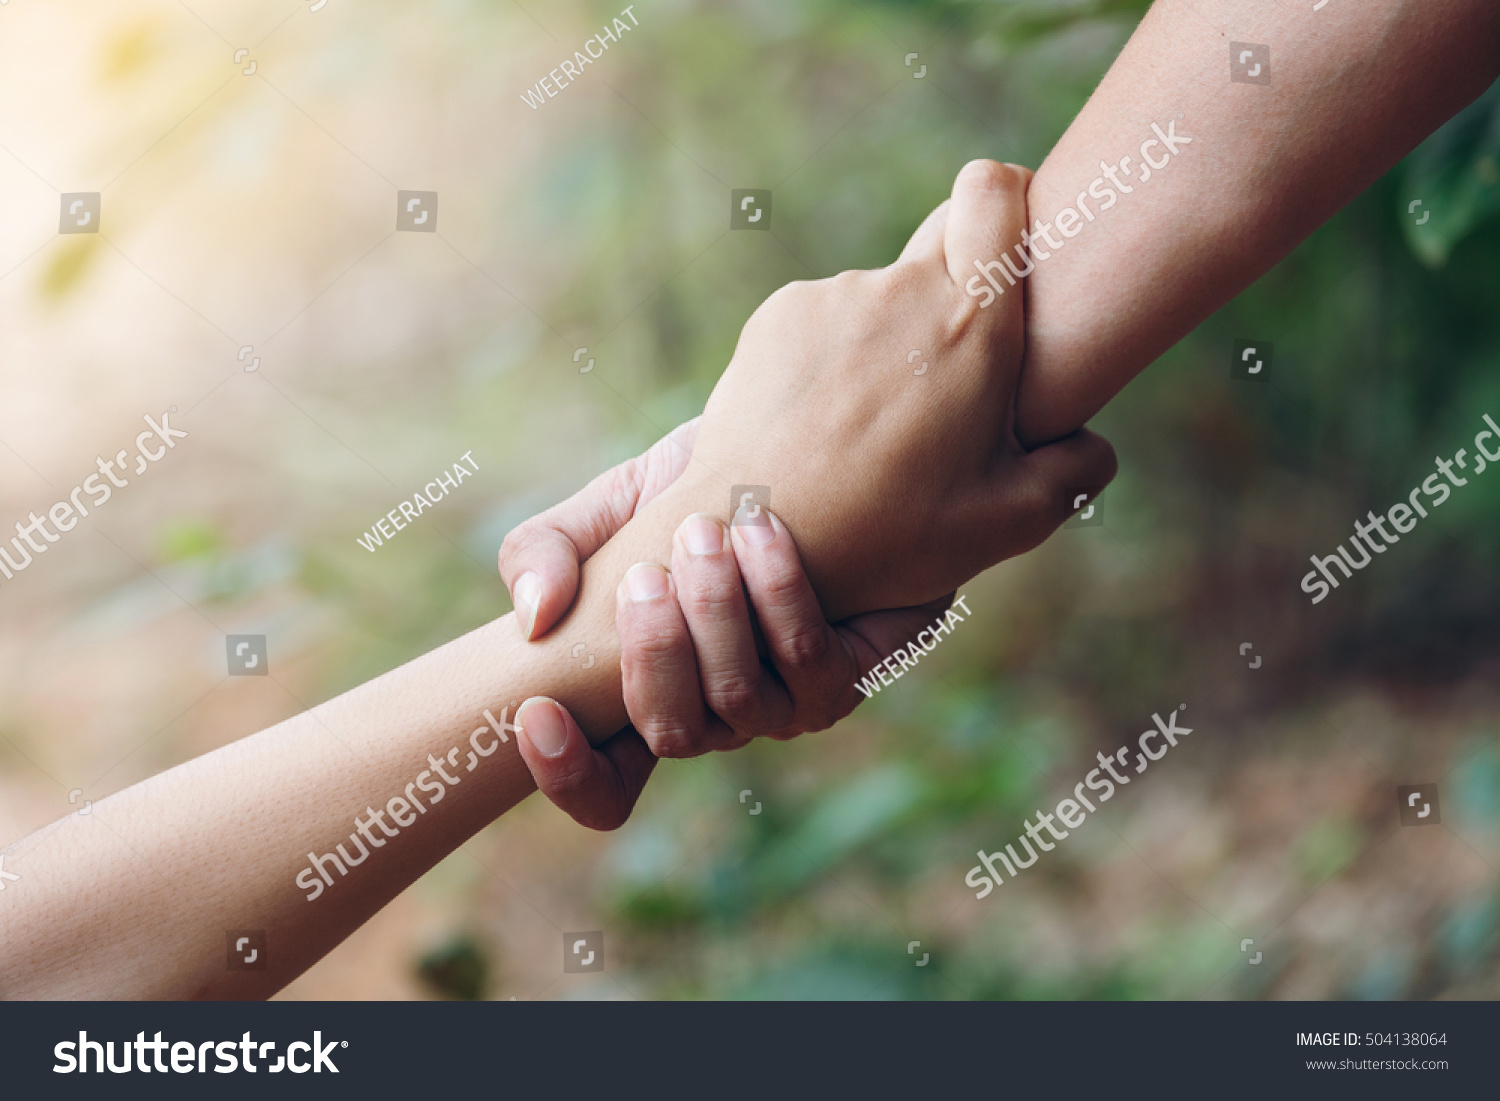 Teamwork respect relationship rescue two buddy Friends trust helping holding hands pulled Help grip each other agreement contract together #504138064